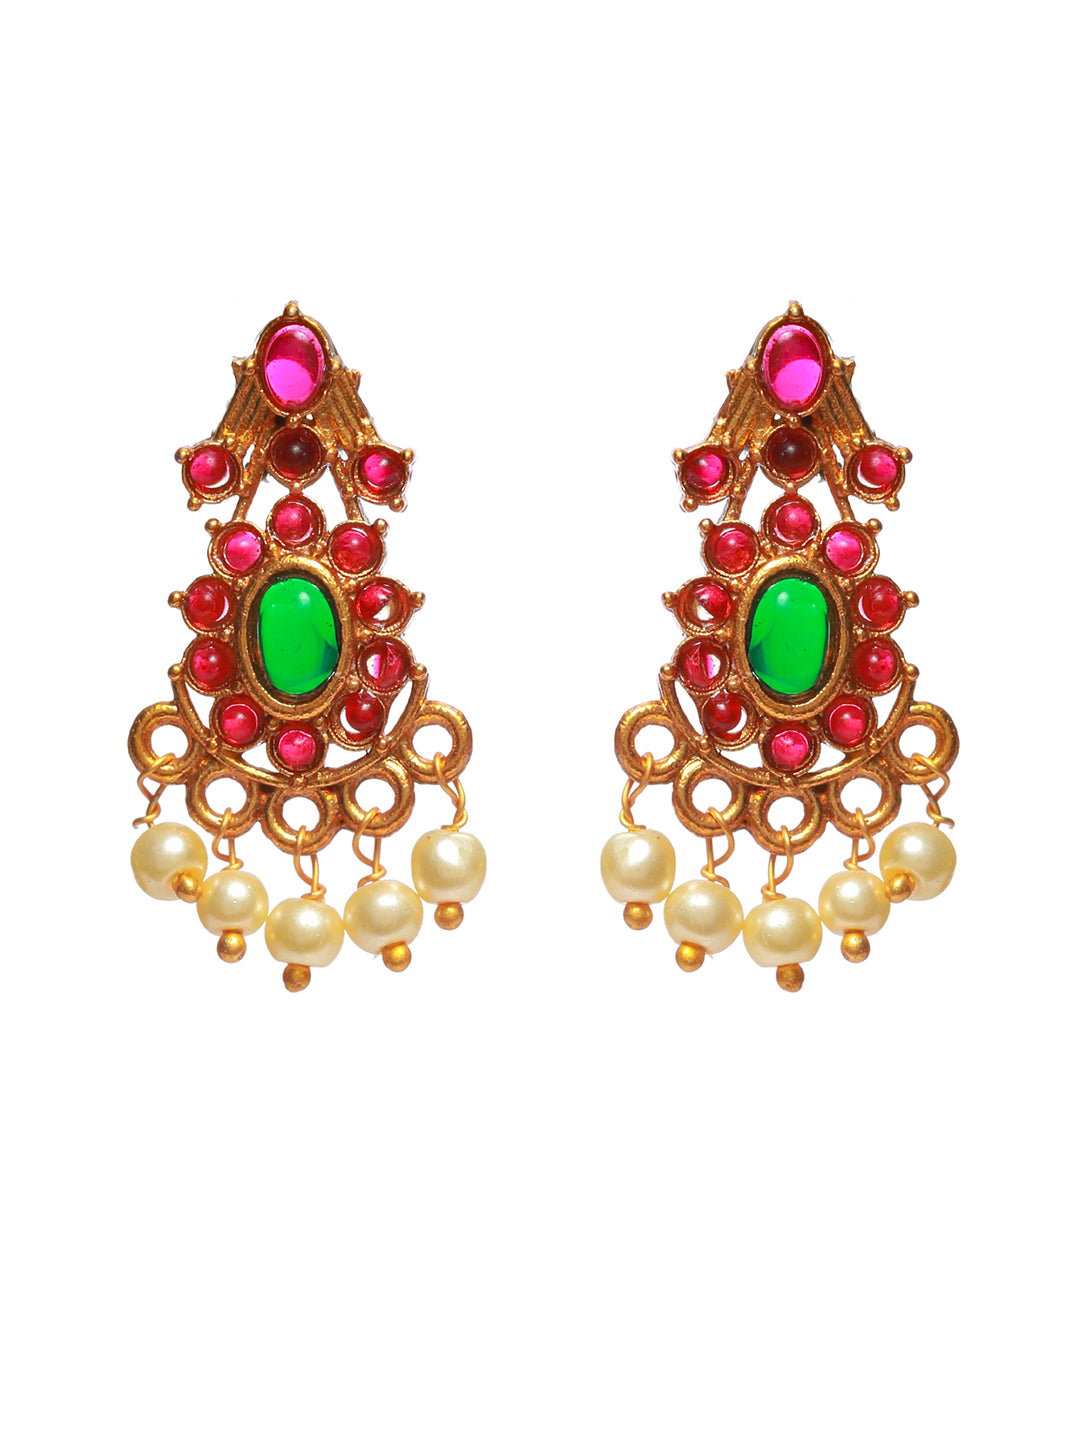 Priyaasi Floral Multicolor Studded Gold Plated Jewellery Set